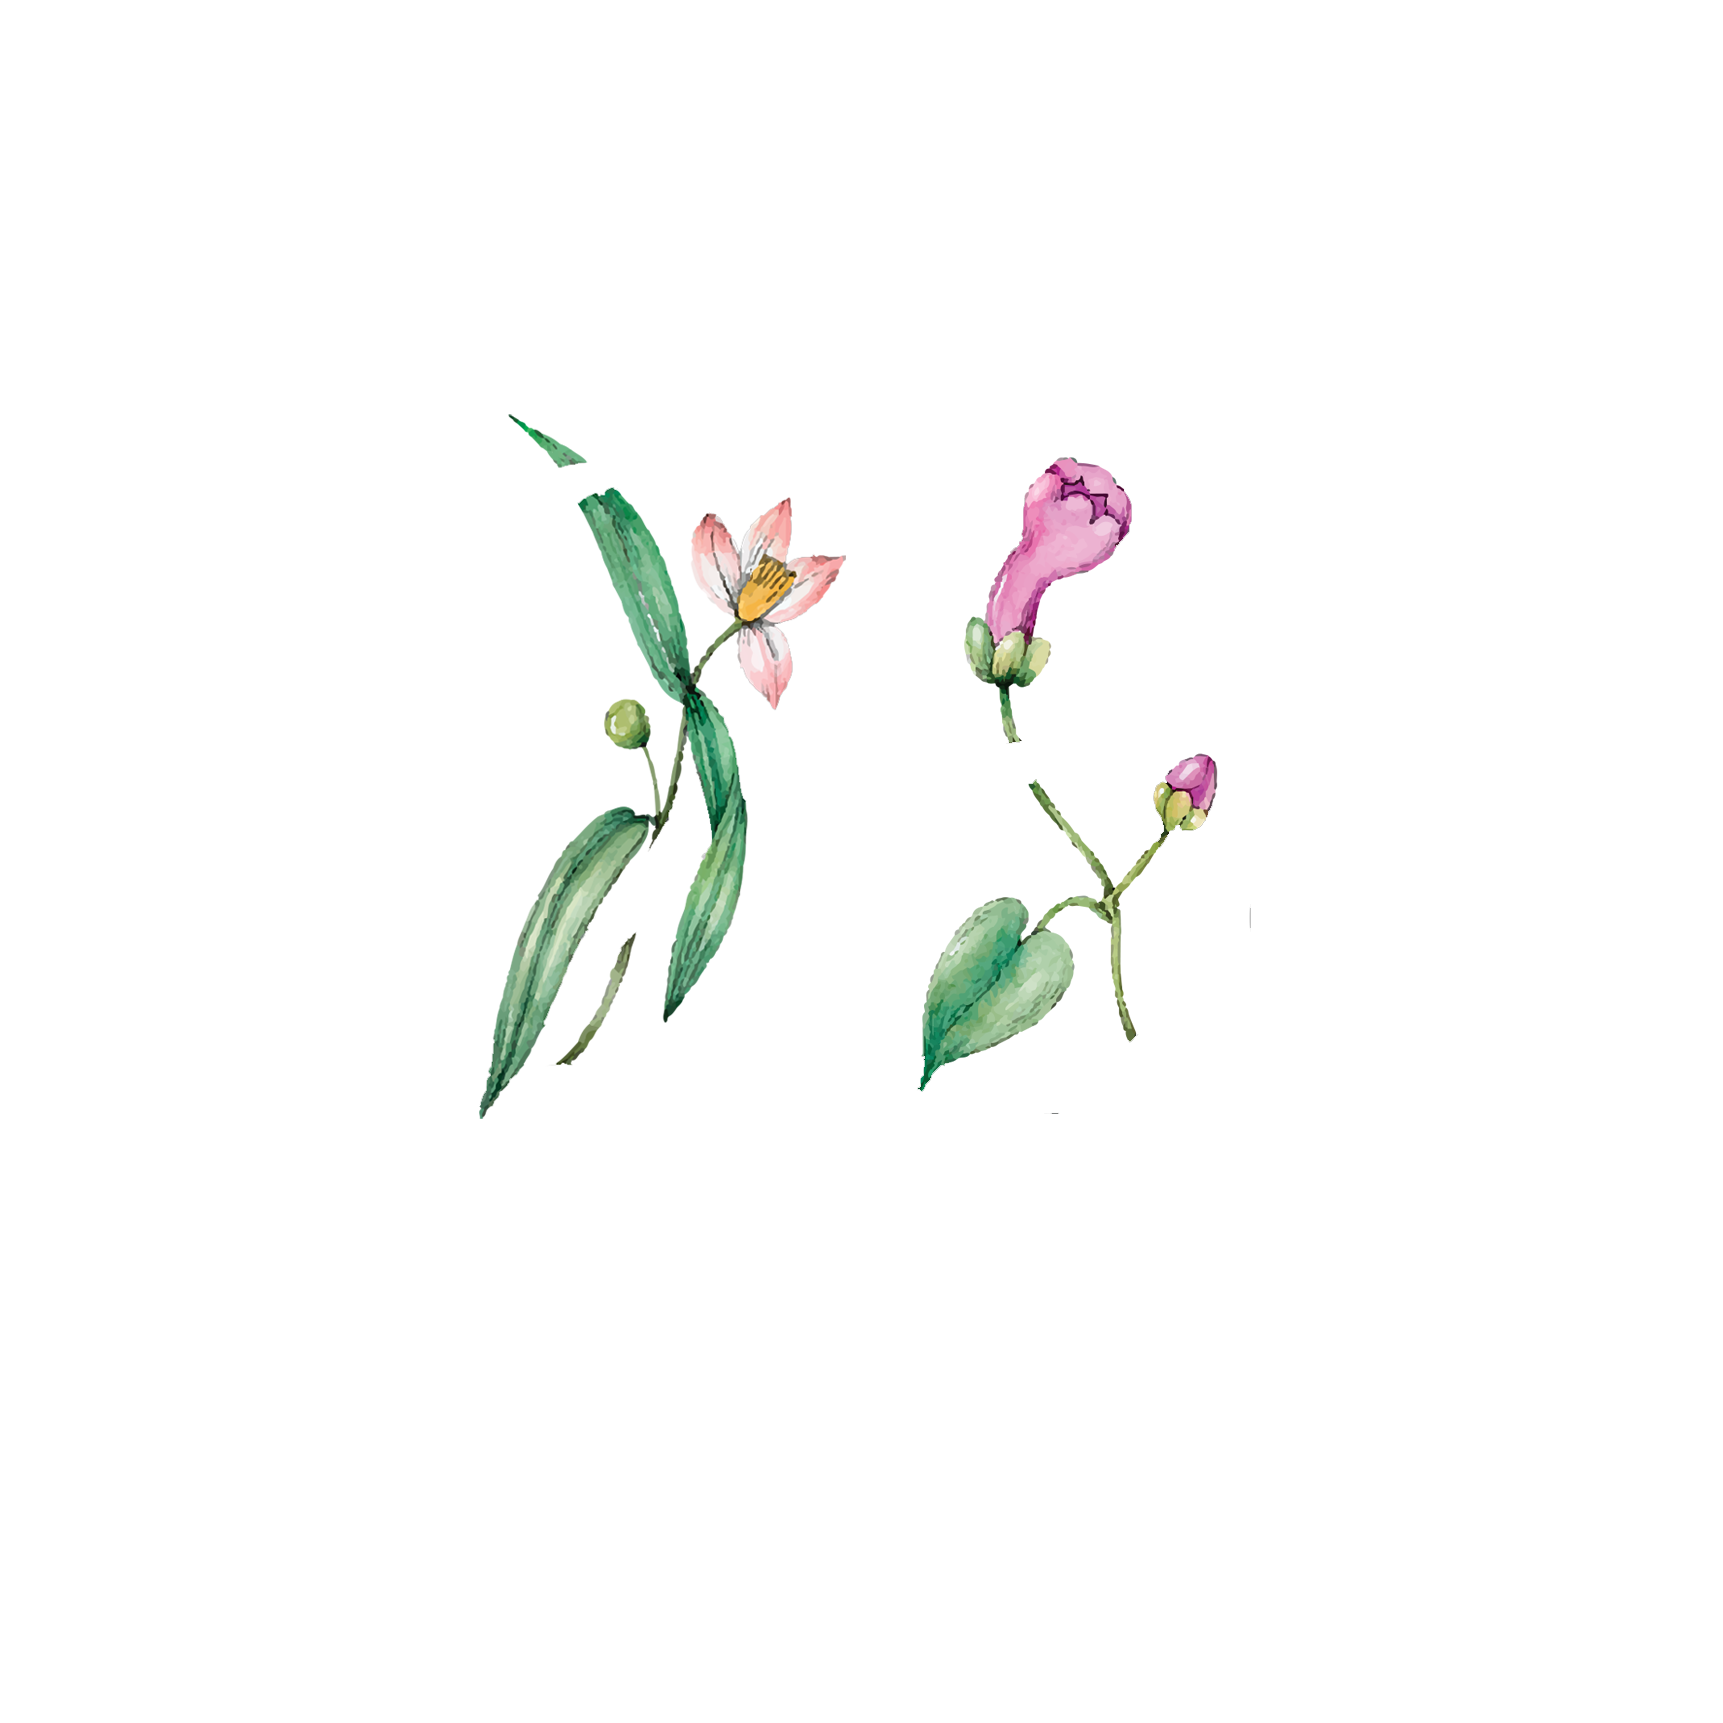 Click to read Day 25 - The Moment